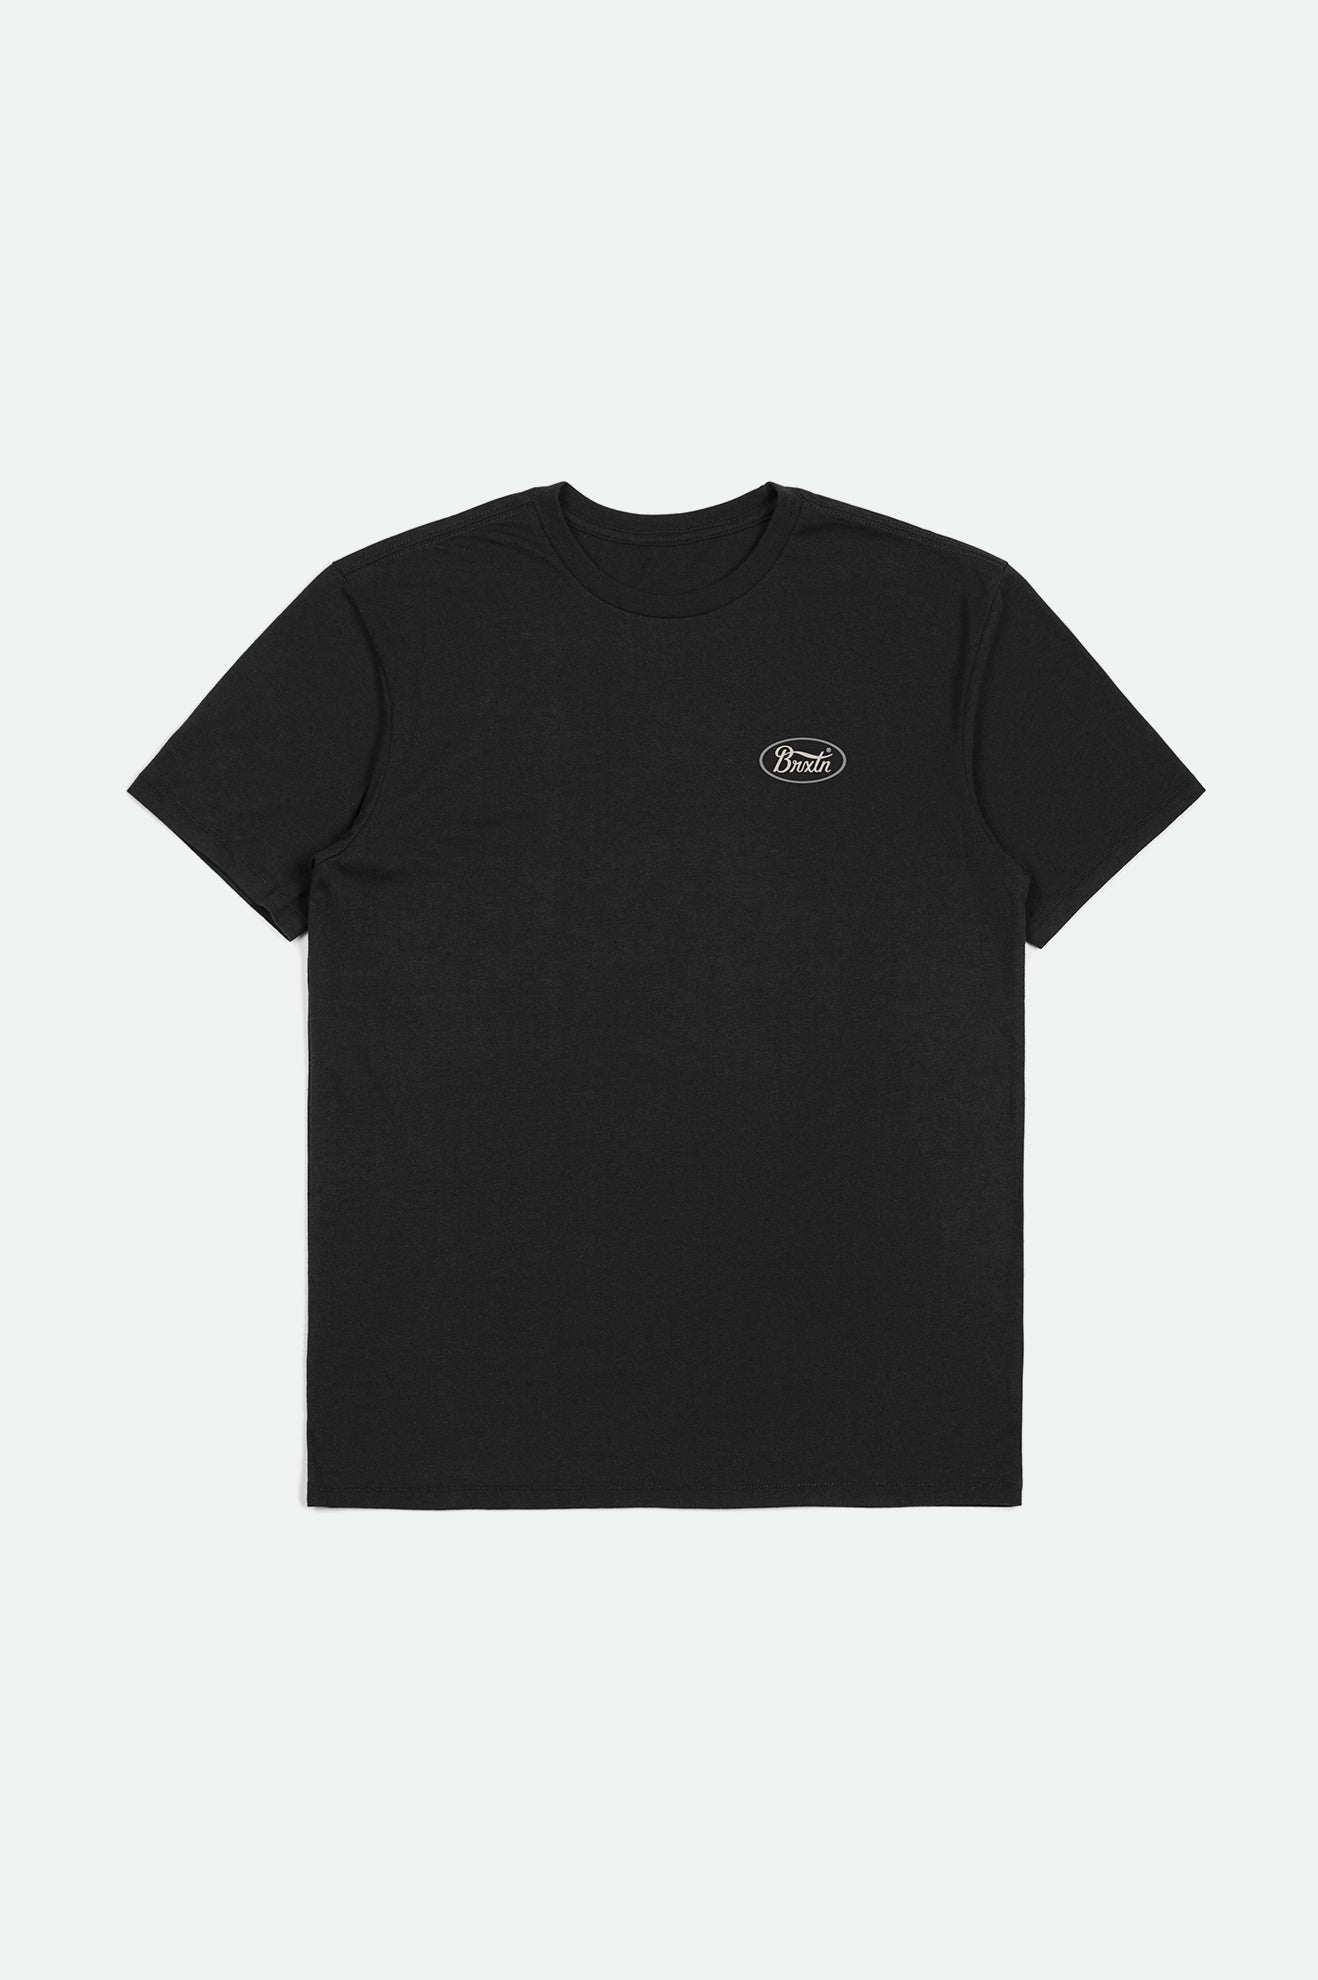 Parsons S/S Tailored Tee - Black